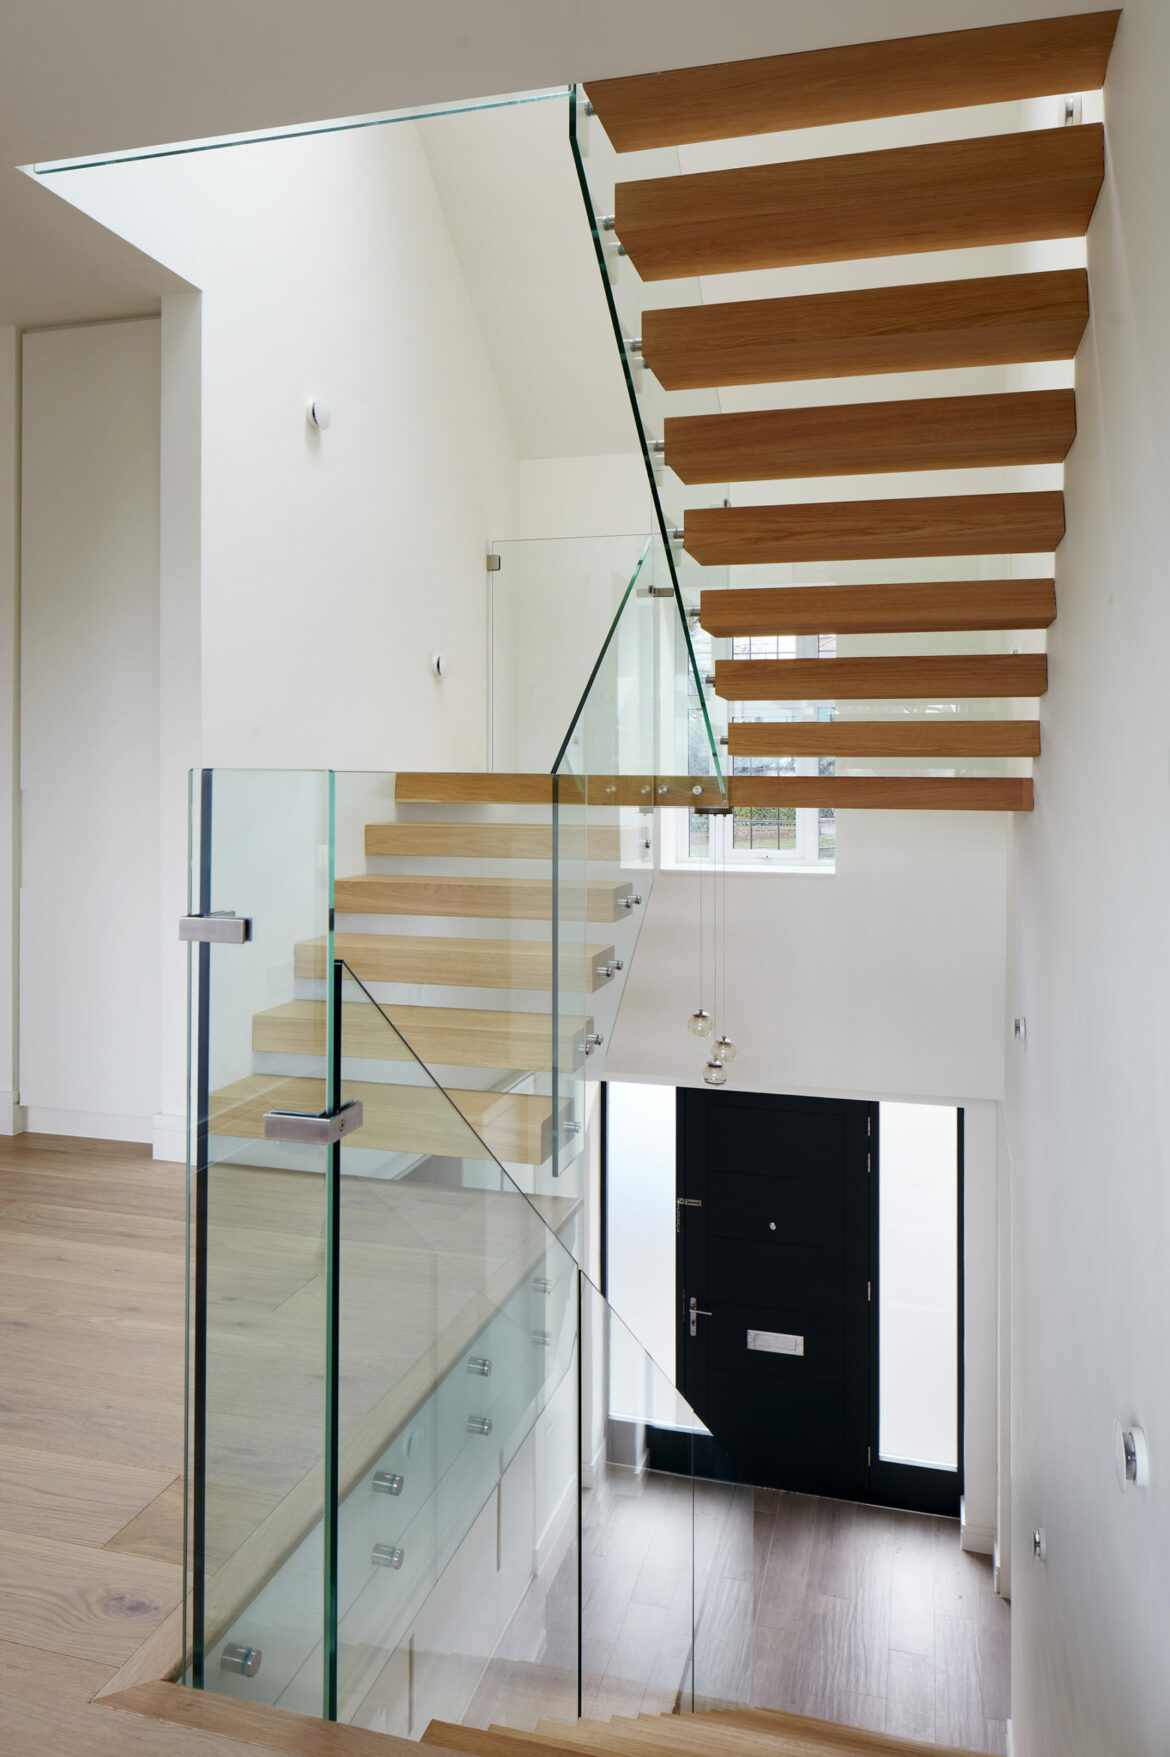 XUL Architecture | Rebuild of a Semi-Detached House in London – House ...